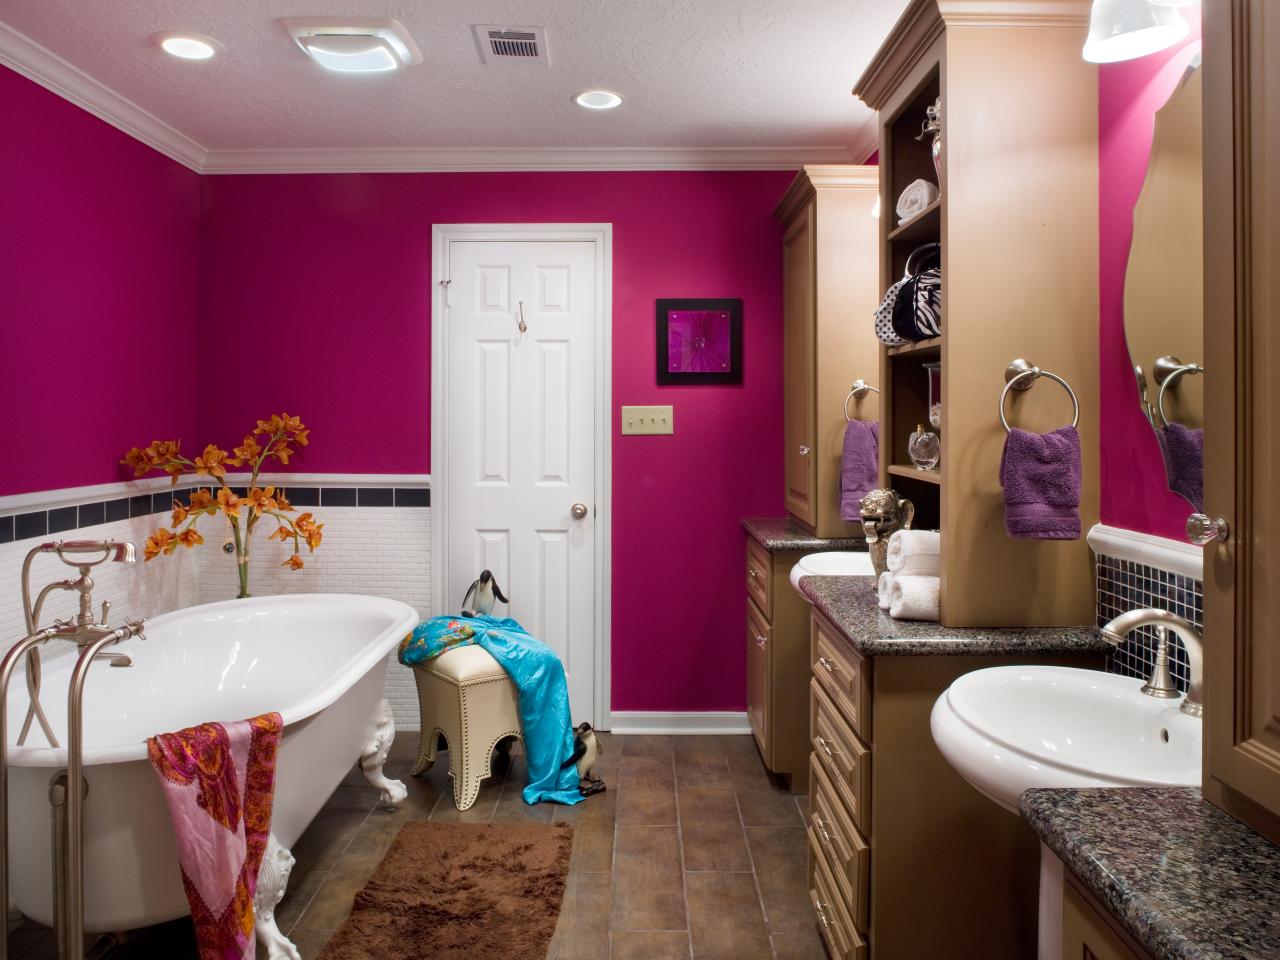 Bathroom Design Styles Pictures, Ideas & Tips From HGTV   HGTV